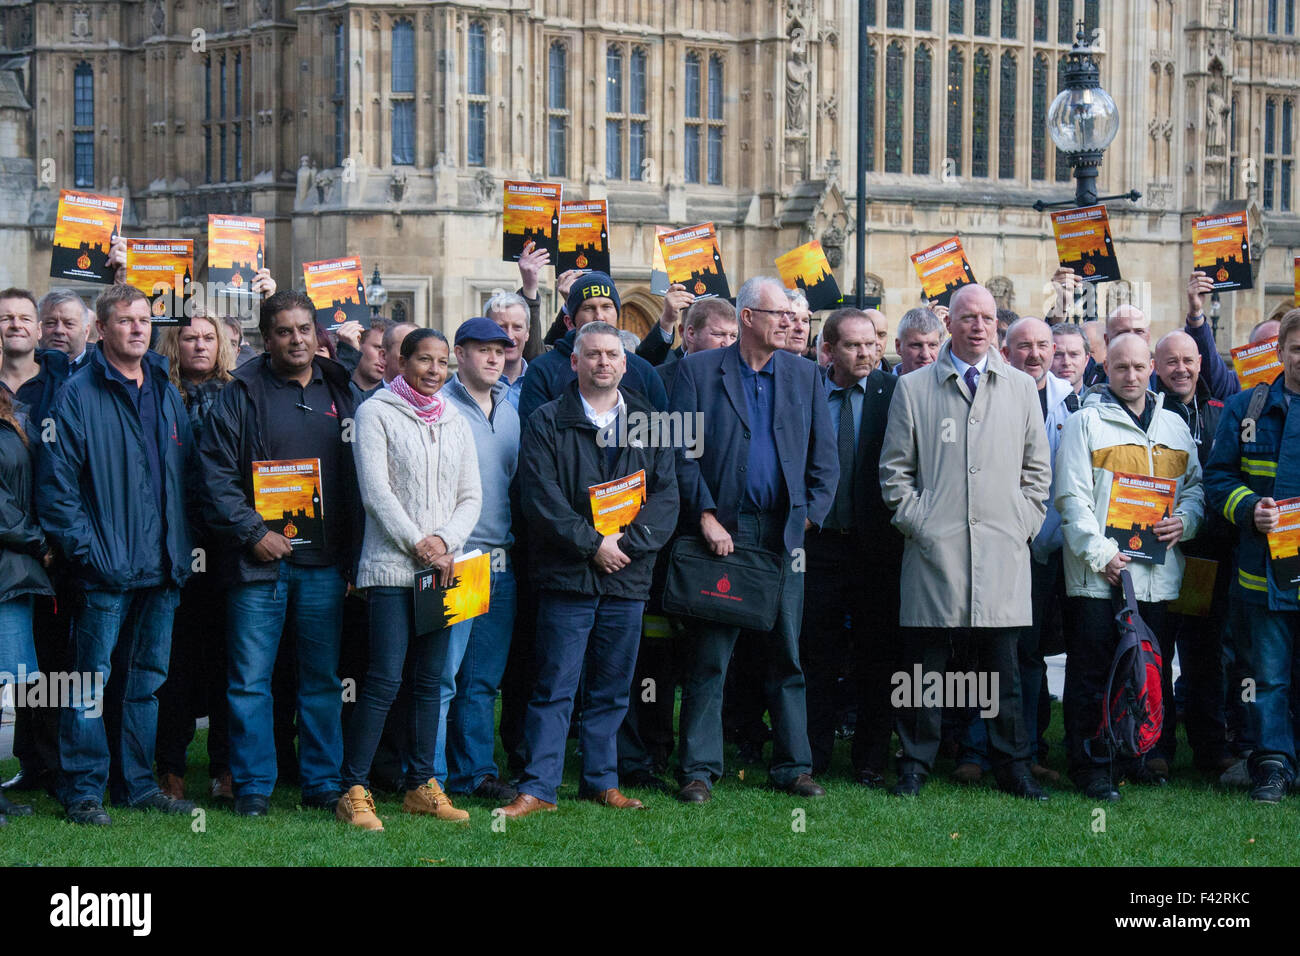 Westminster, London, October 14th 2015. Members of the FBU gather outside Parliament as they prepare to lobby MPs over cuts, the Trade Union Bill and the possibility of their service falling under the control of Police and Crime Commissioners. PICTURED: FBU Members pose for a group shot as they prepare to enter Parliament. Credit:  Paul Davey/Alamy Live News Stock Photo